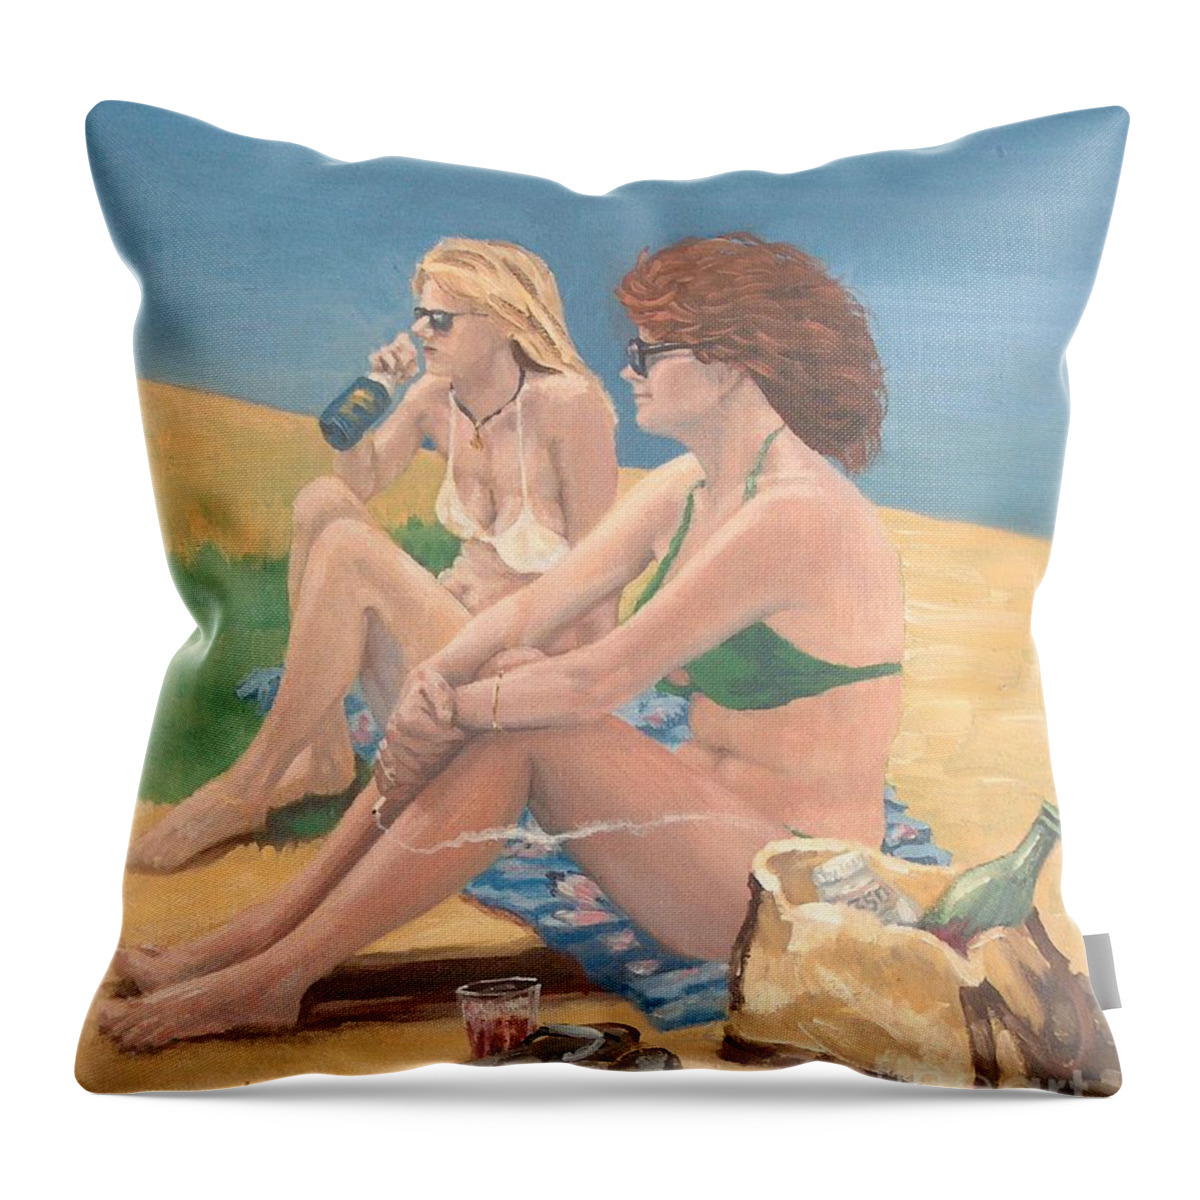 Woman Throw Pillow featuring the painting On the Beach by William Michel